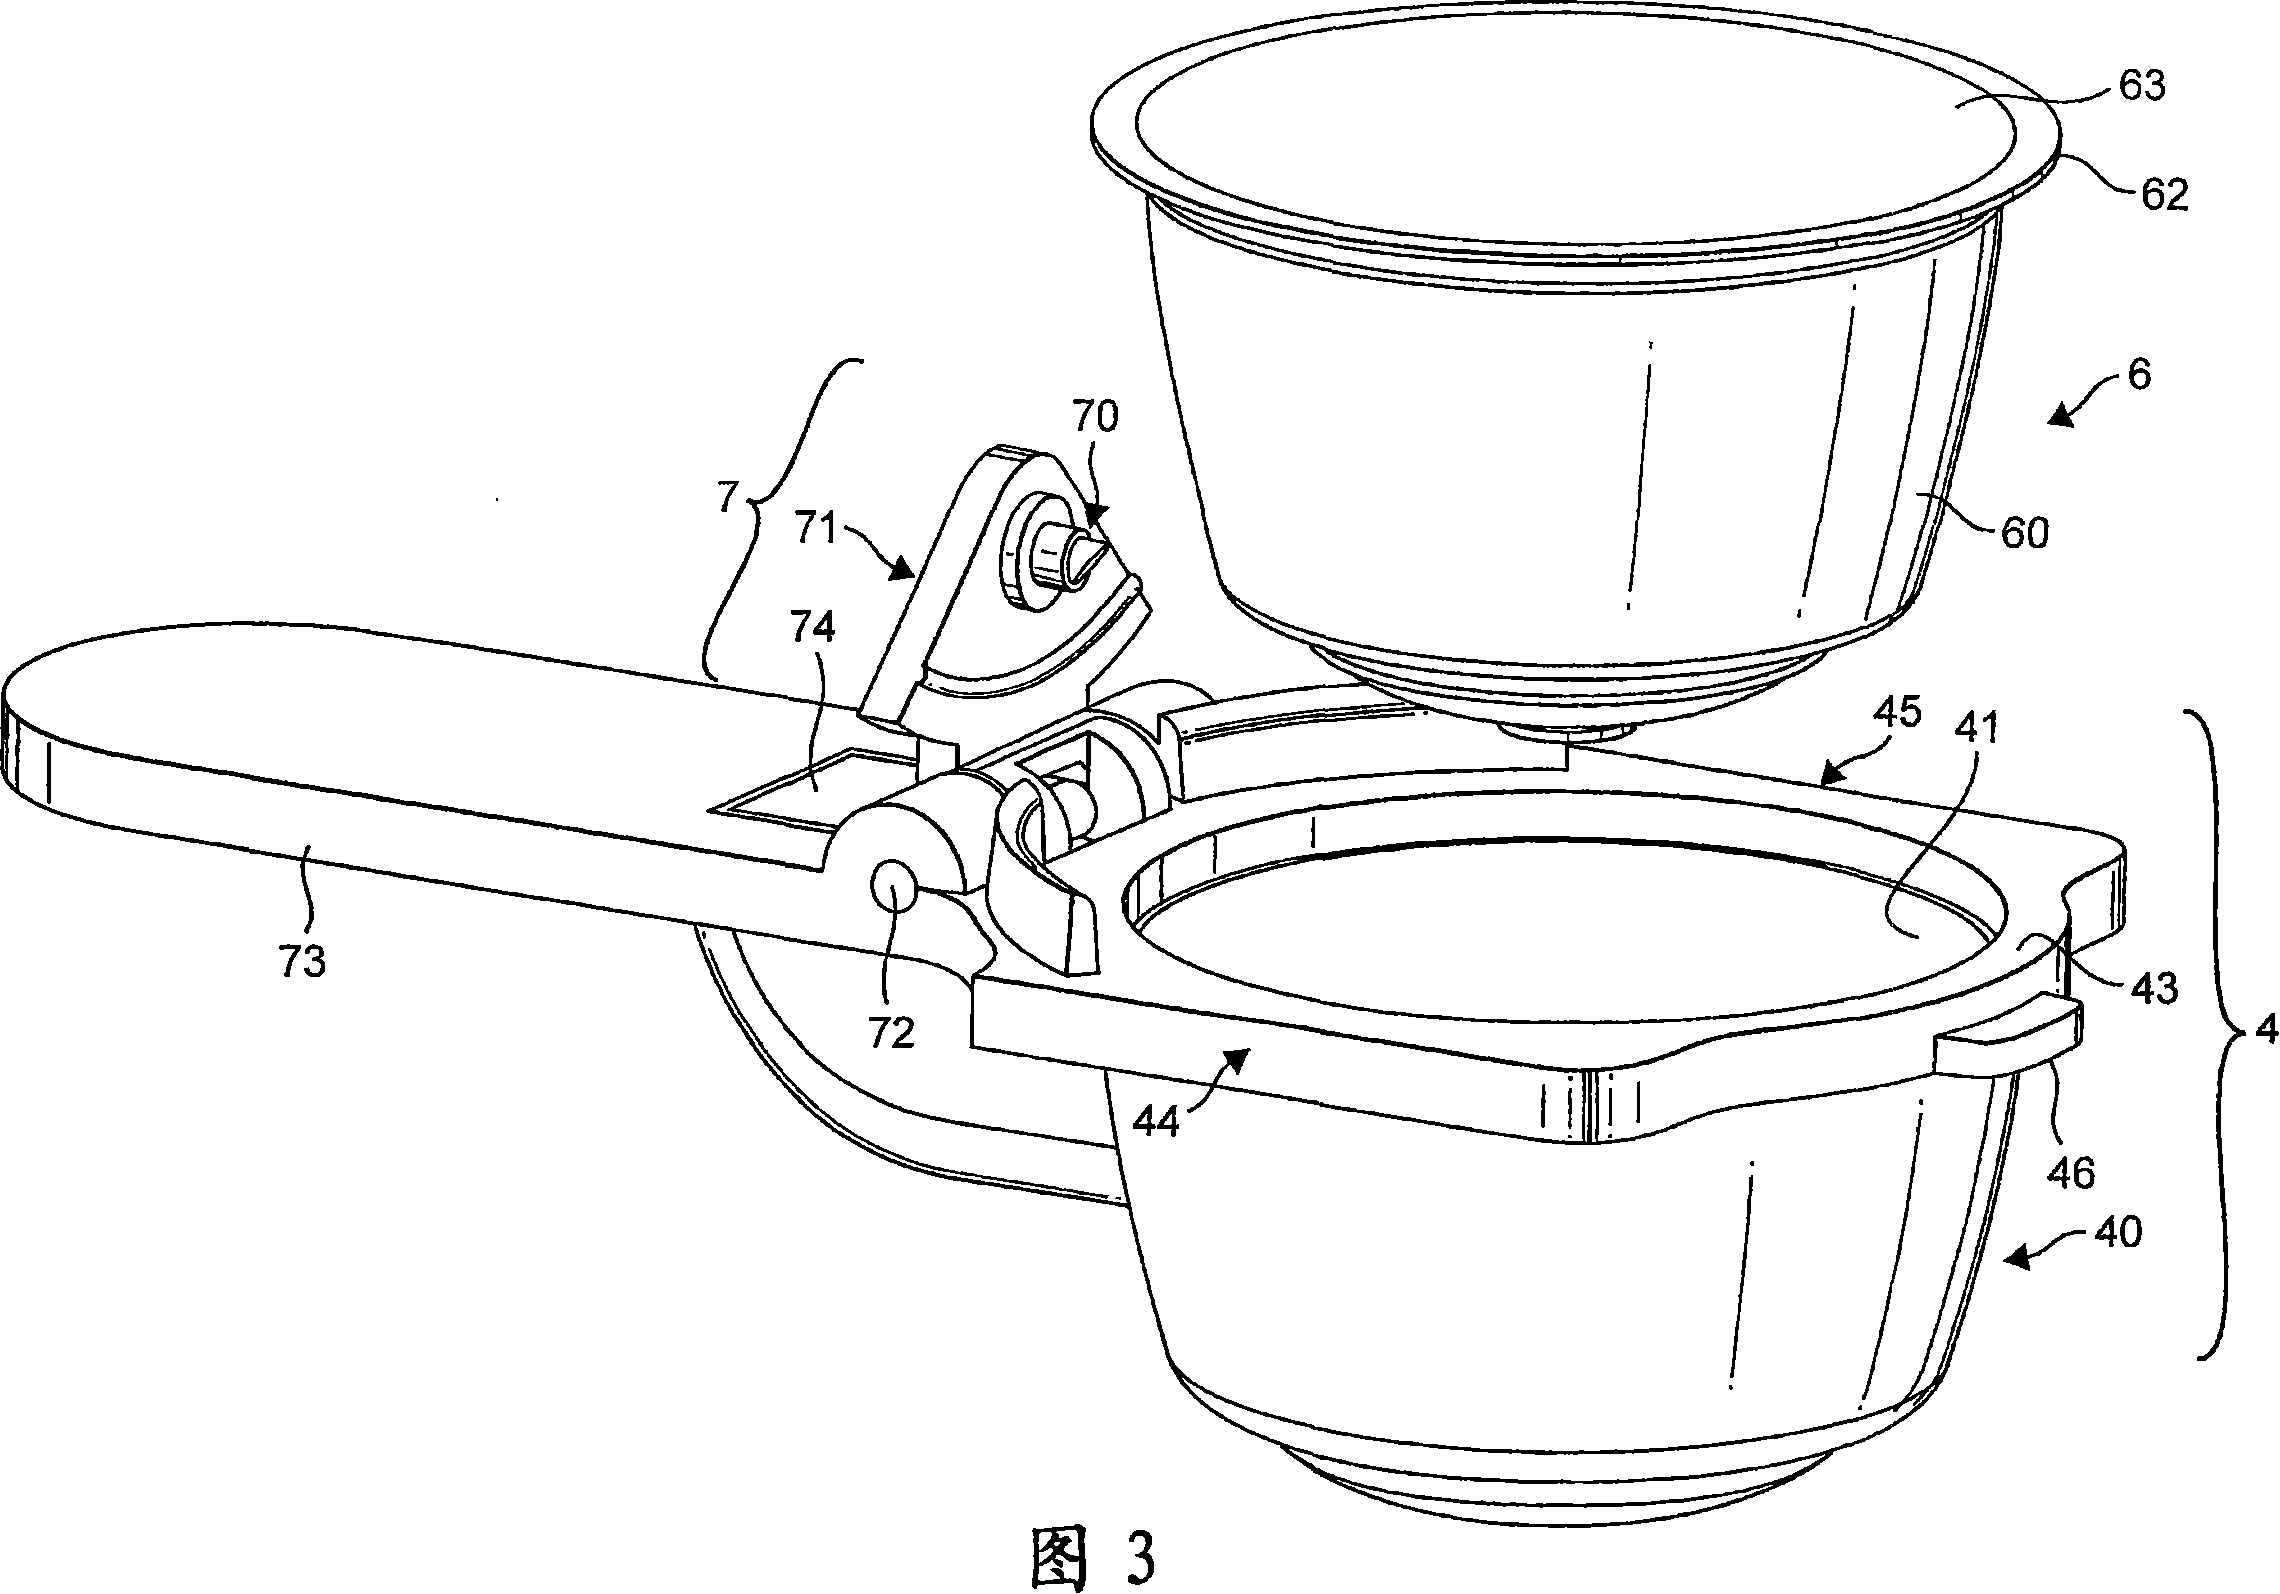 Device for preparing a drink from a capsule by injection of a pressurized fluid and capsule-holder adapted therefore